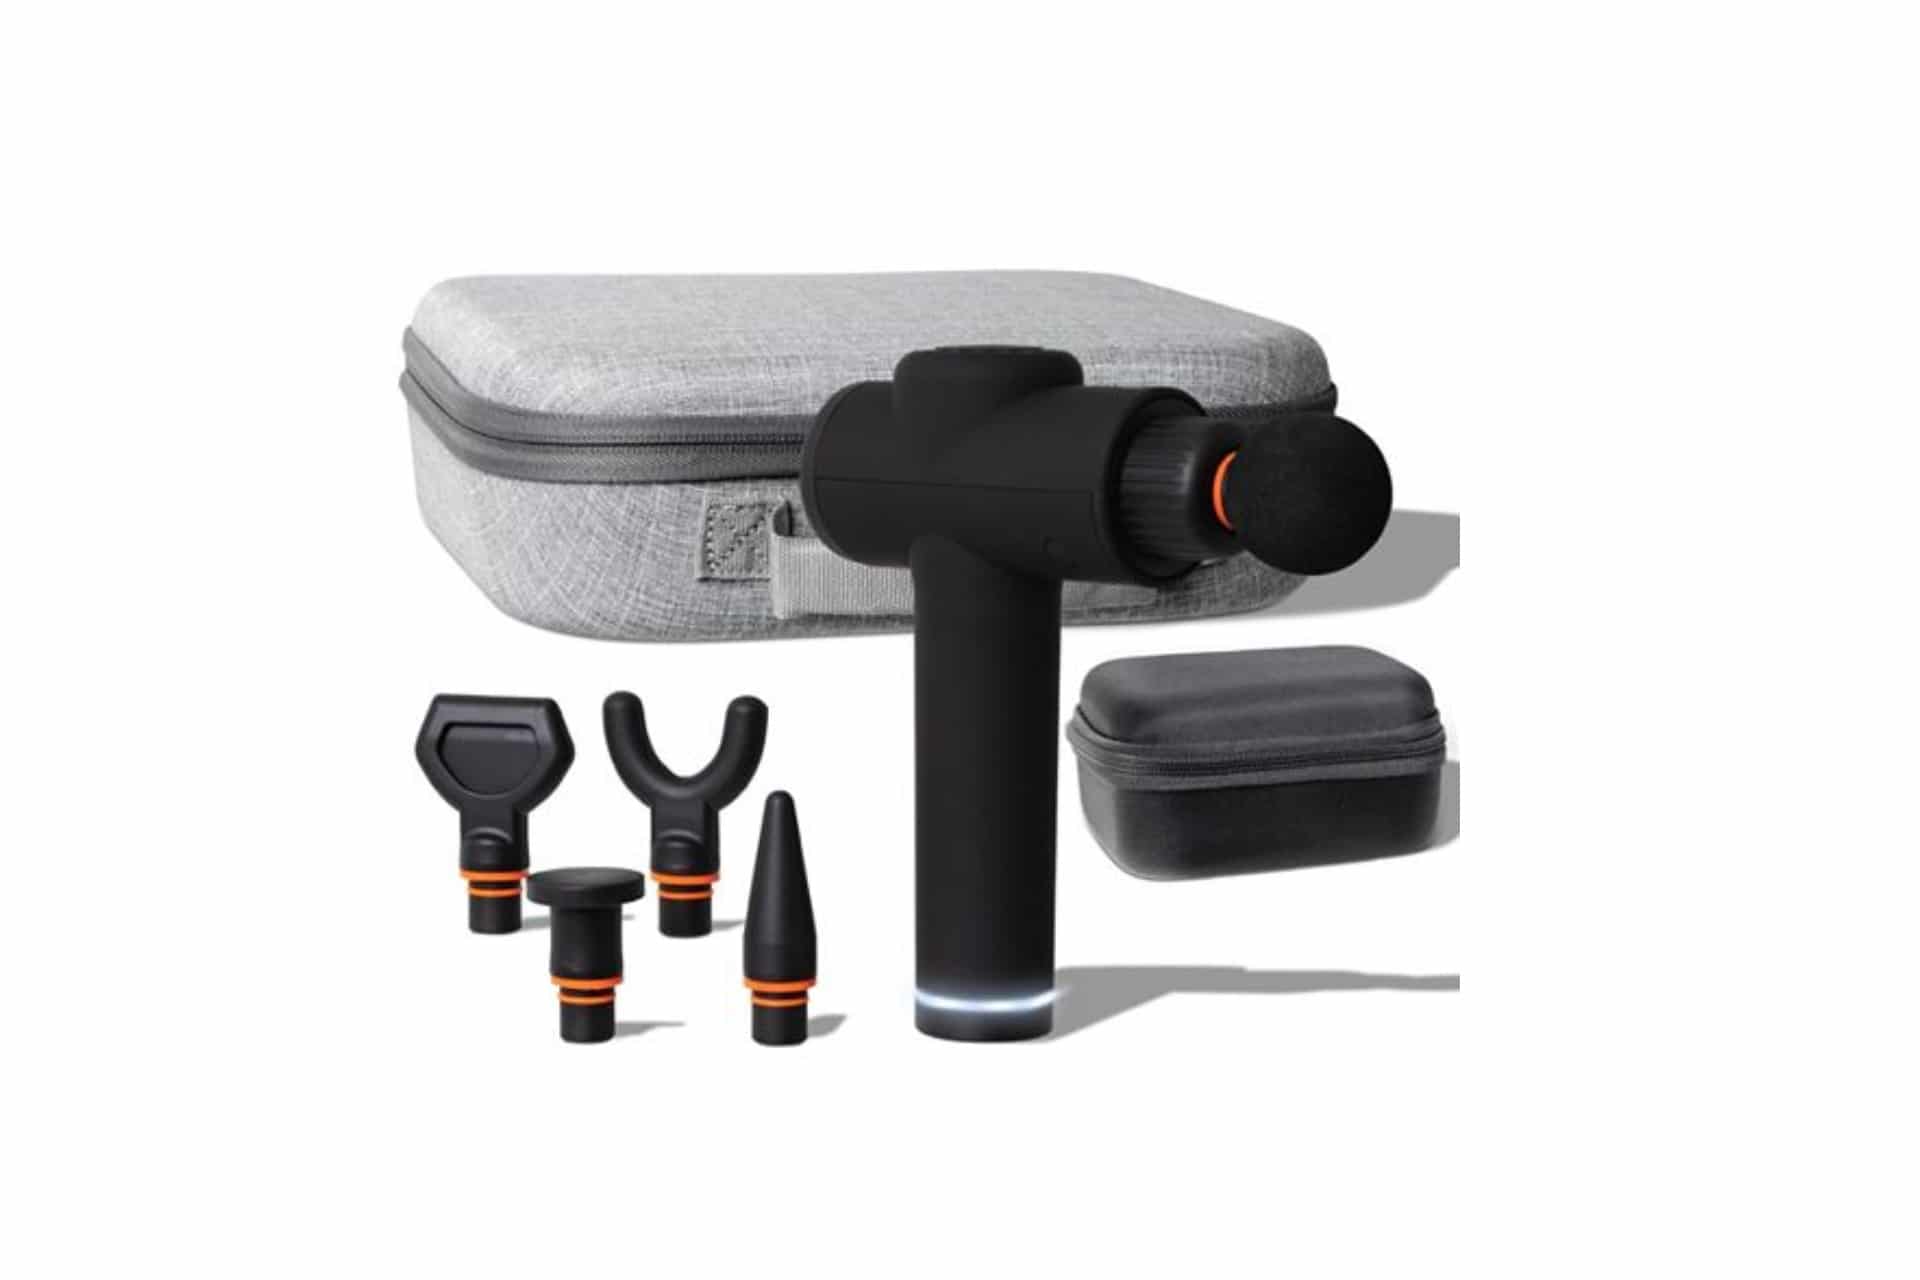 massage gun with attachments and a grey carrying case